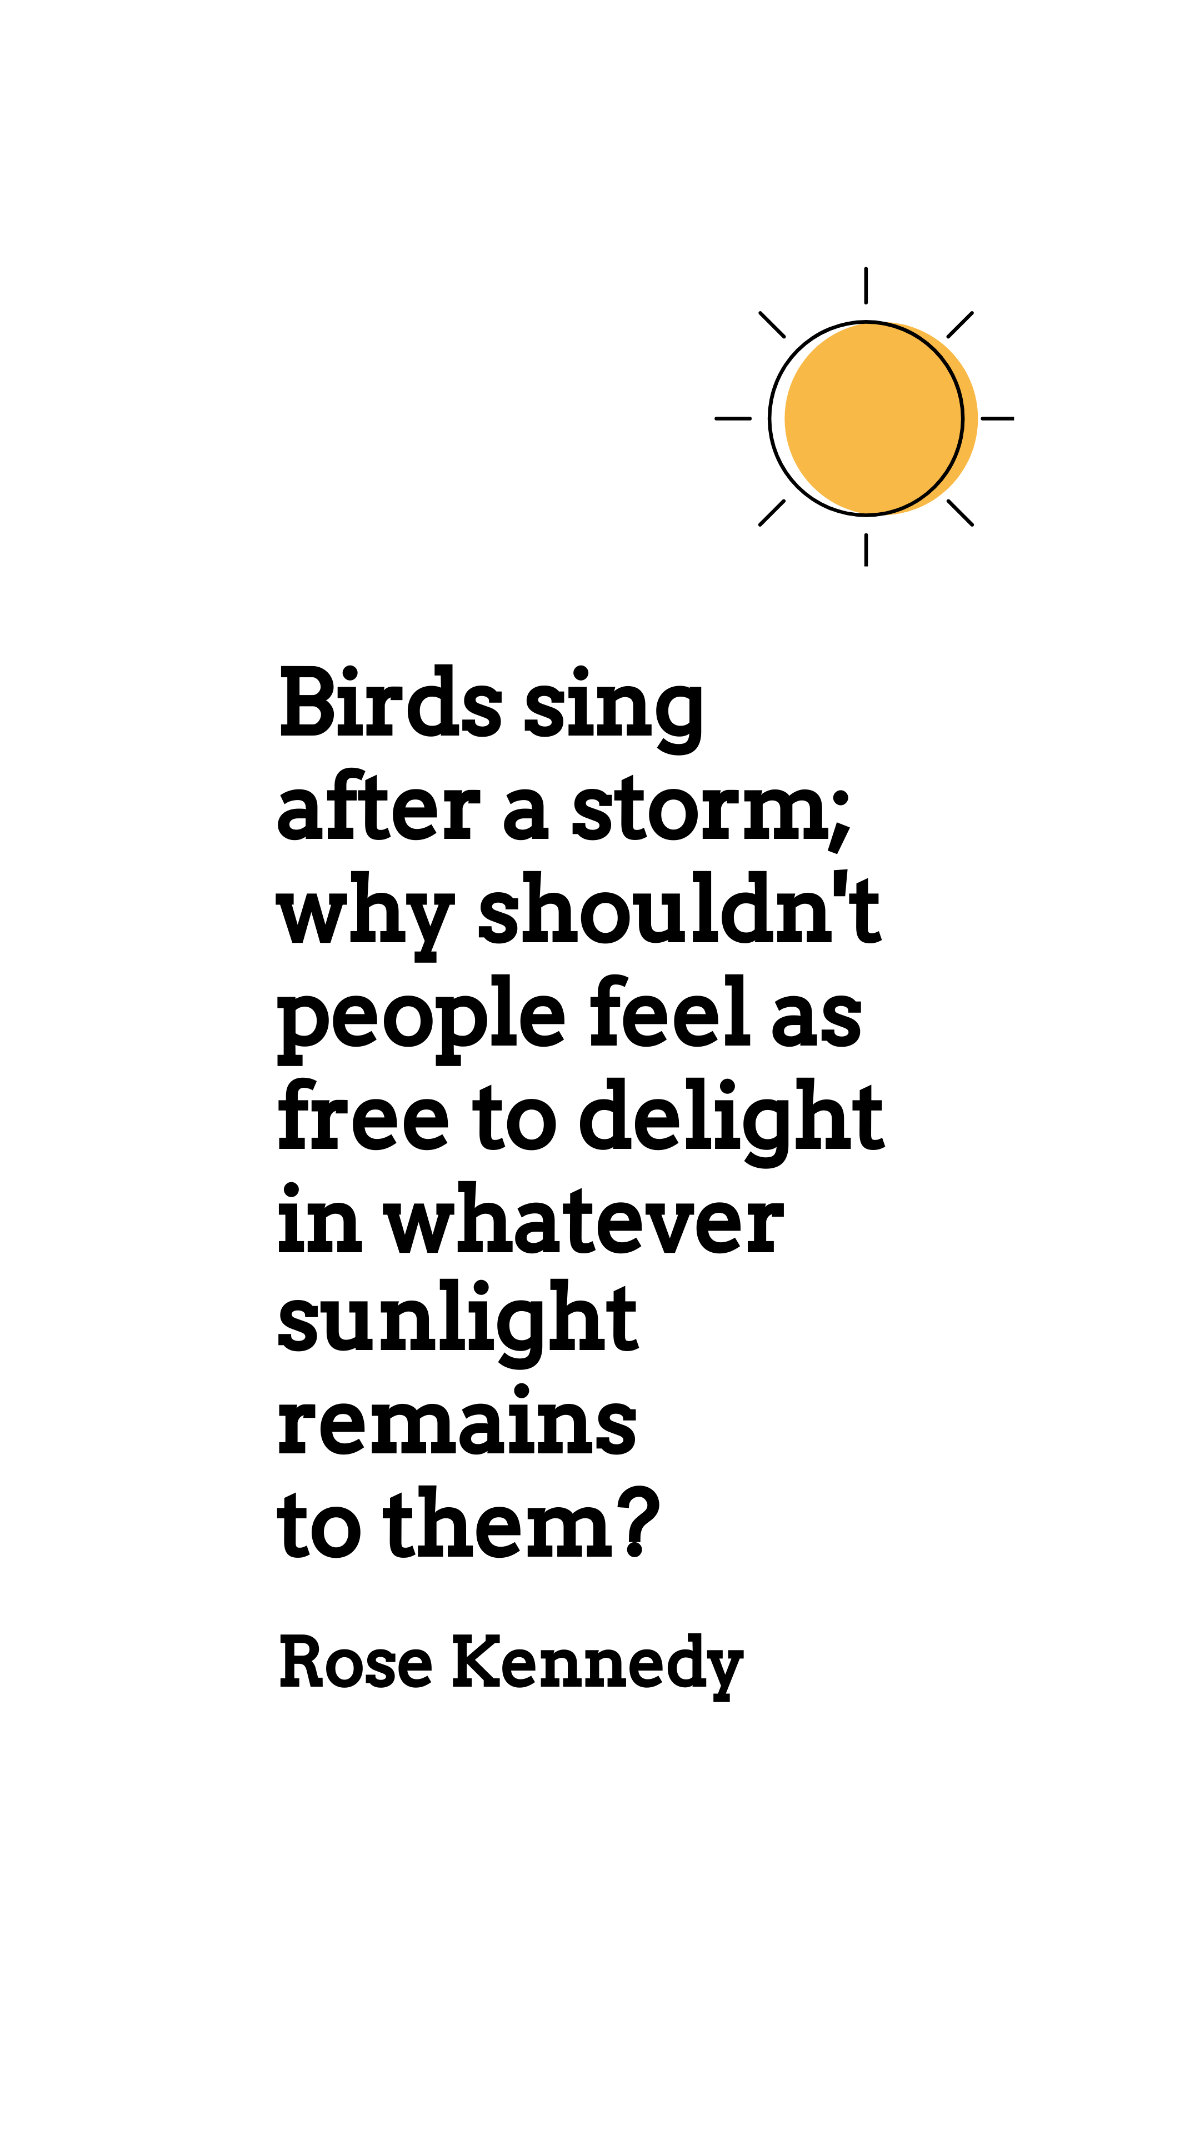 Rose Kennedy - Birds sing after a storm; why shouldn't people feel as to delight in whatever sunlight remains to them? Template